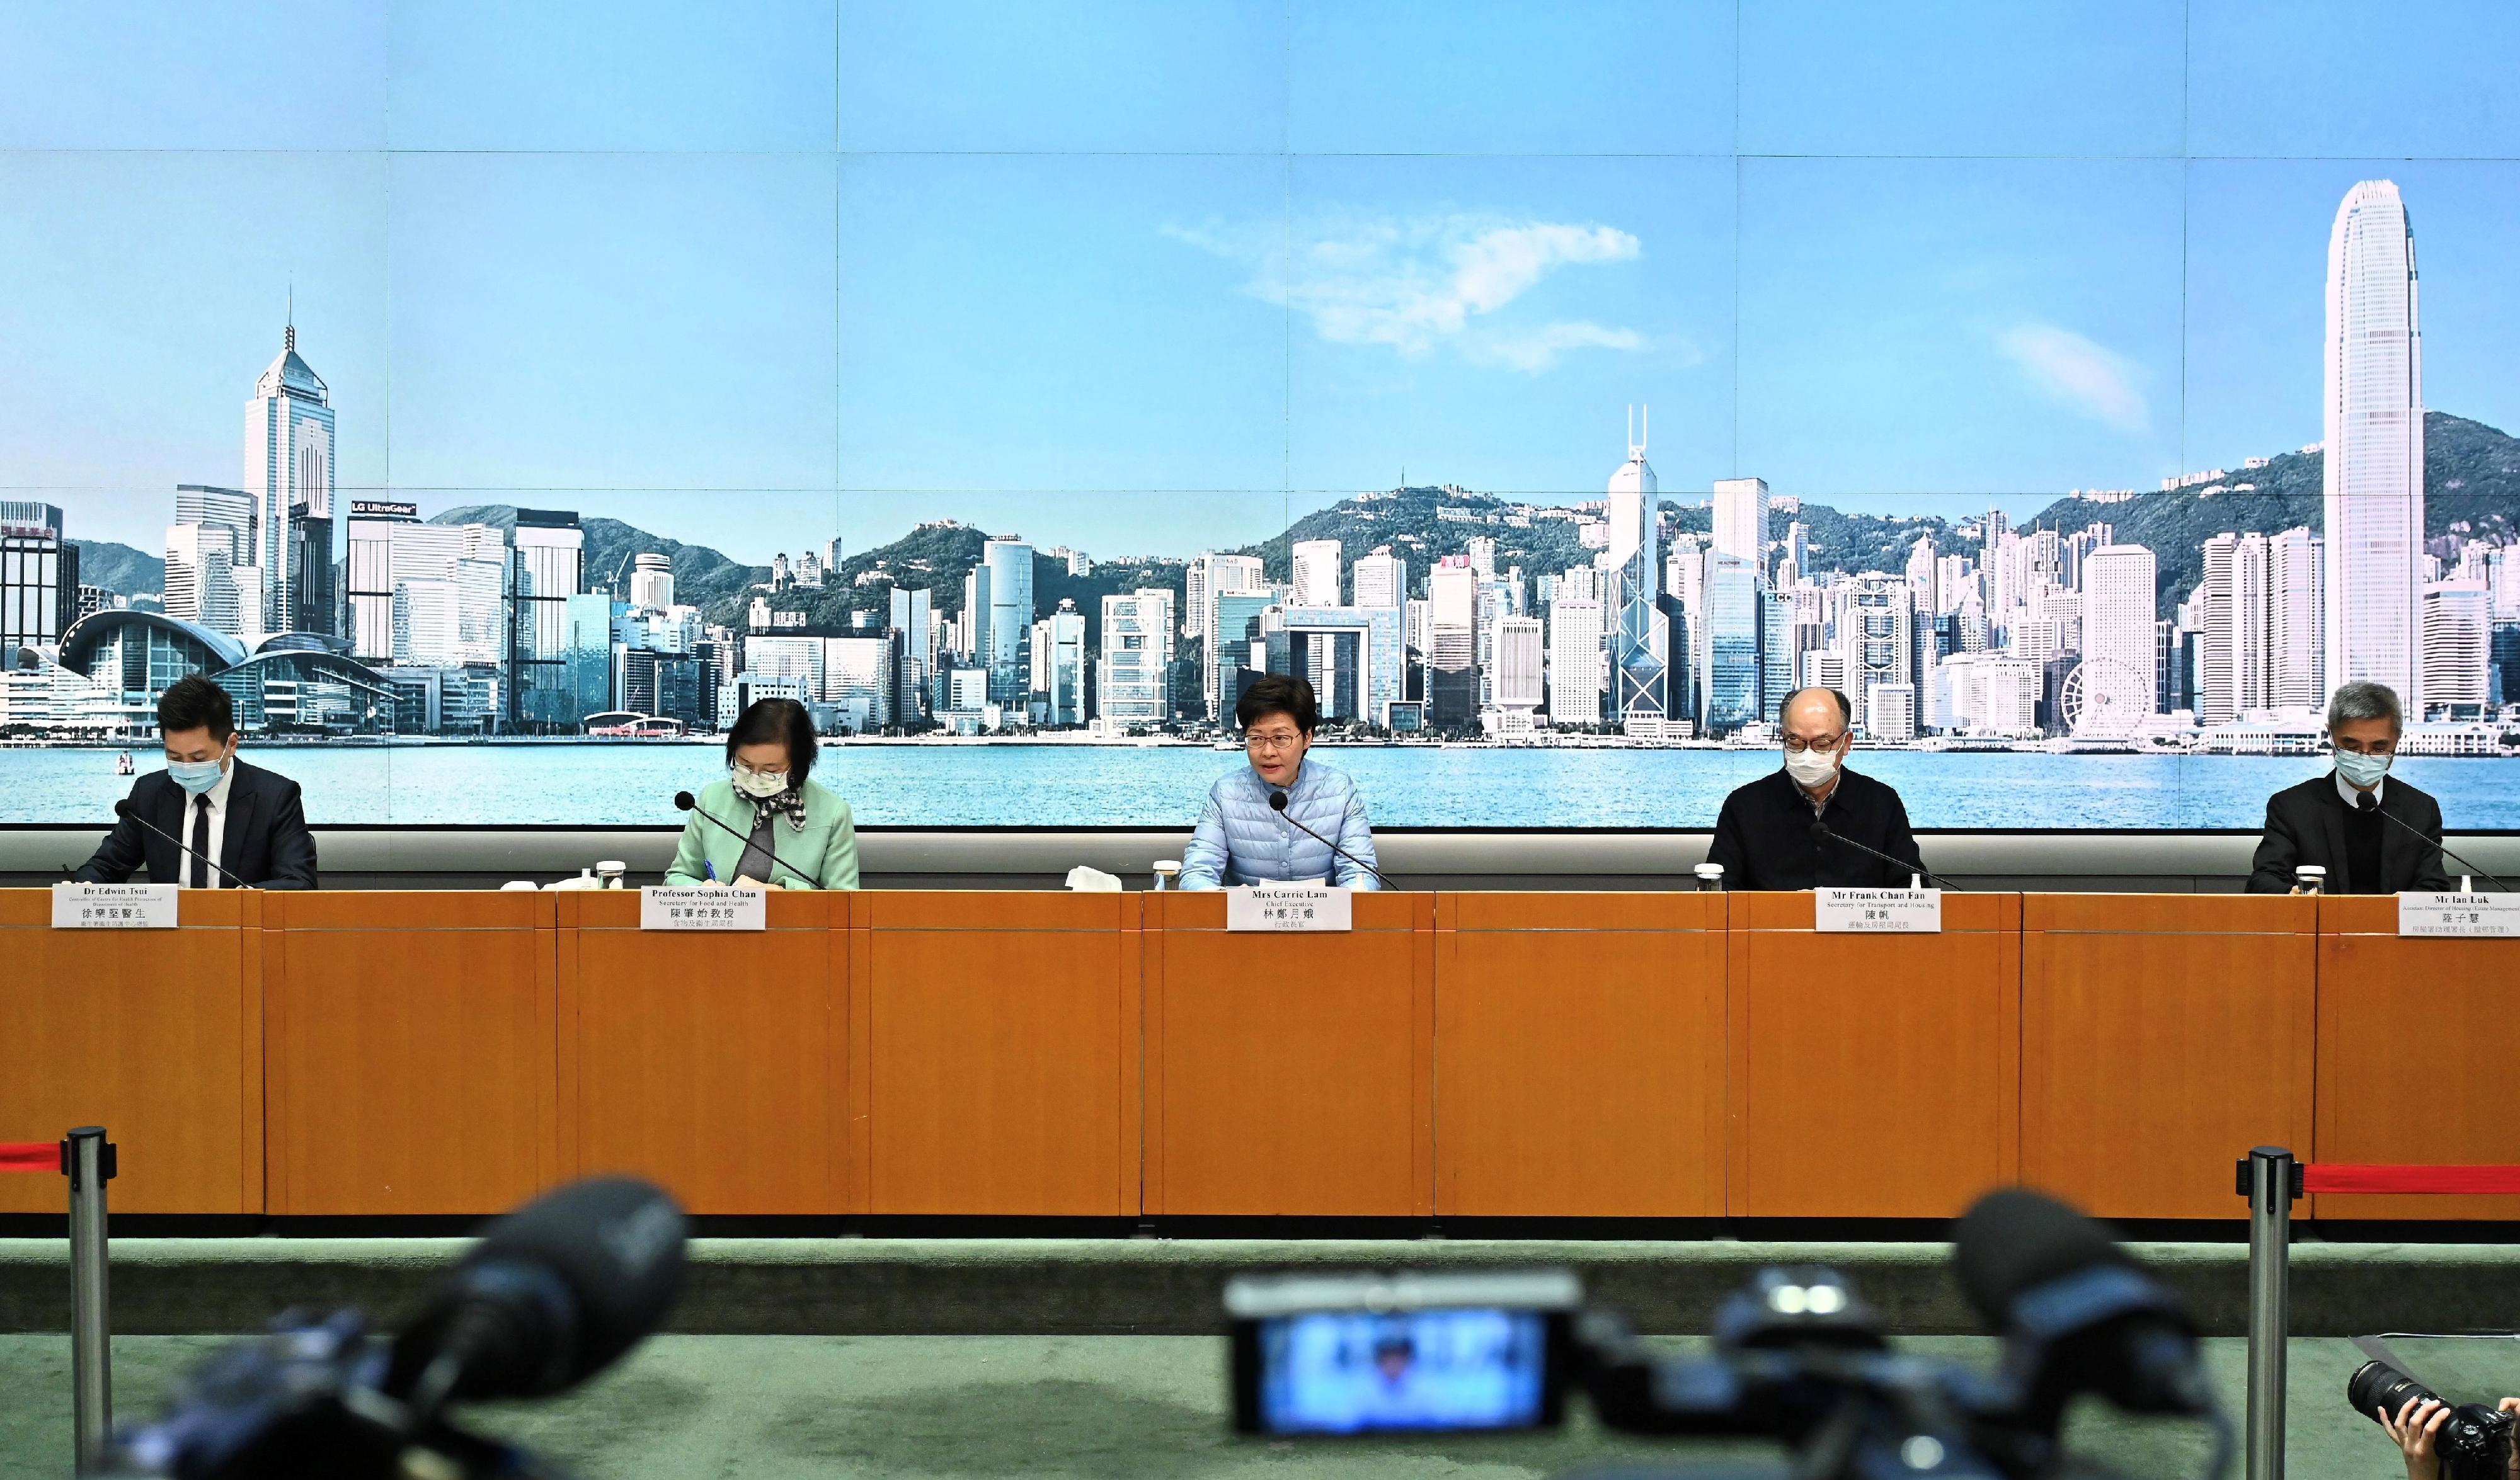 The Chief Executive, Mrs Carrie Lam (centre), holds a press conference on measures to fight COVID-19 with the Secretary for Food and Health, Professor Sophia Chan (second left); the Secretary for Transport and Housing, Mr Frank Chan Fan (second right); the Controller of the Centre for Health Protection of the Department of Health, Dr Edwin Tsui (first left); and the Assistant Director of Housing (Estate Management), Mr Ian Luk (first right), at the Central Government Offices, Tamar, today (January 22).

